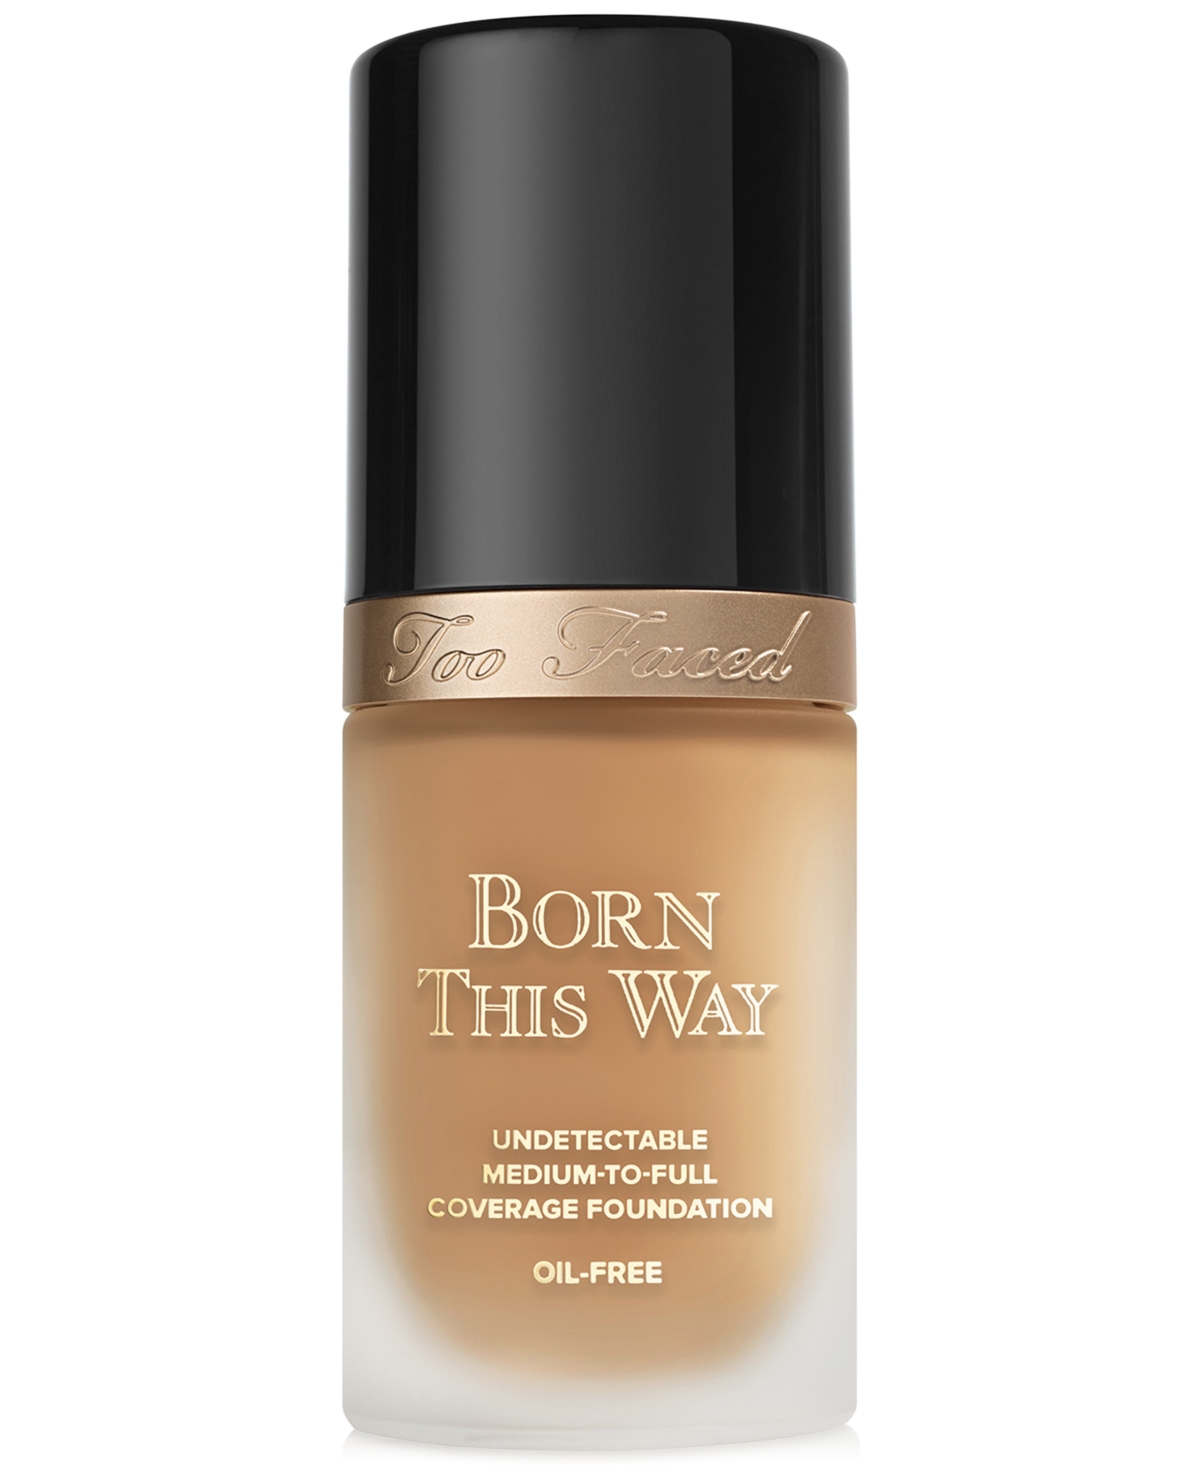 Too Faced Born This Way Flawless Coverage Natural Finish Foundation In Praline - Medium Tan W,golden Undertone